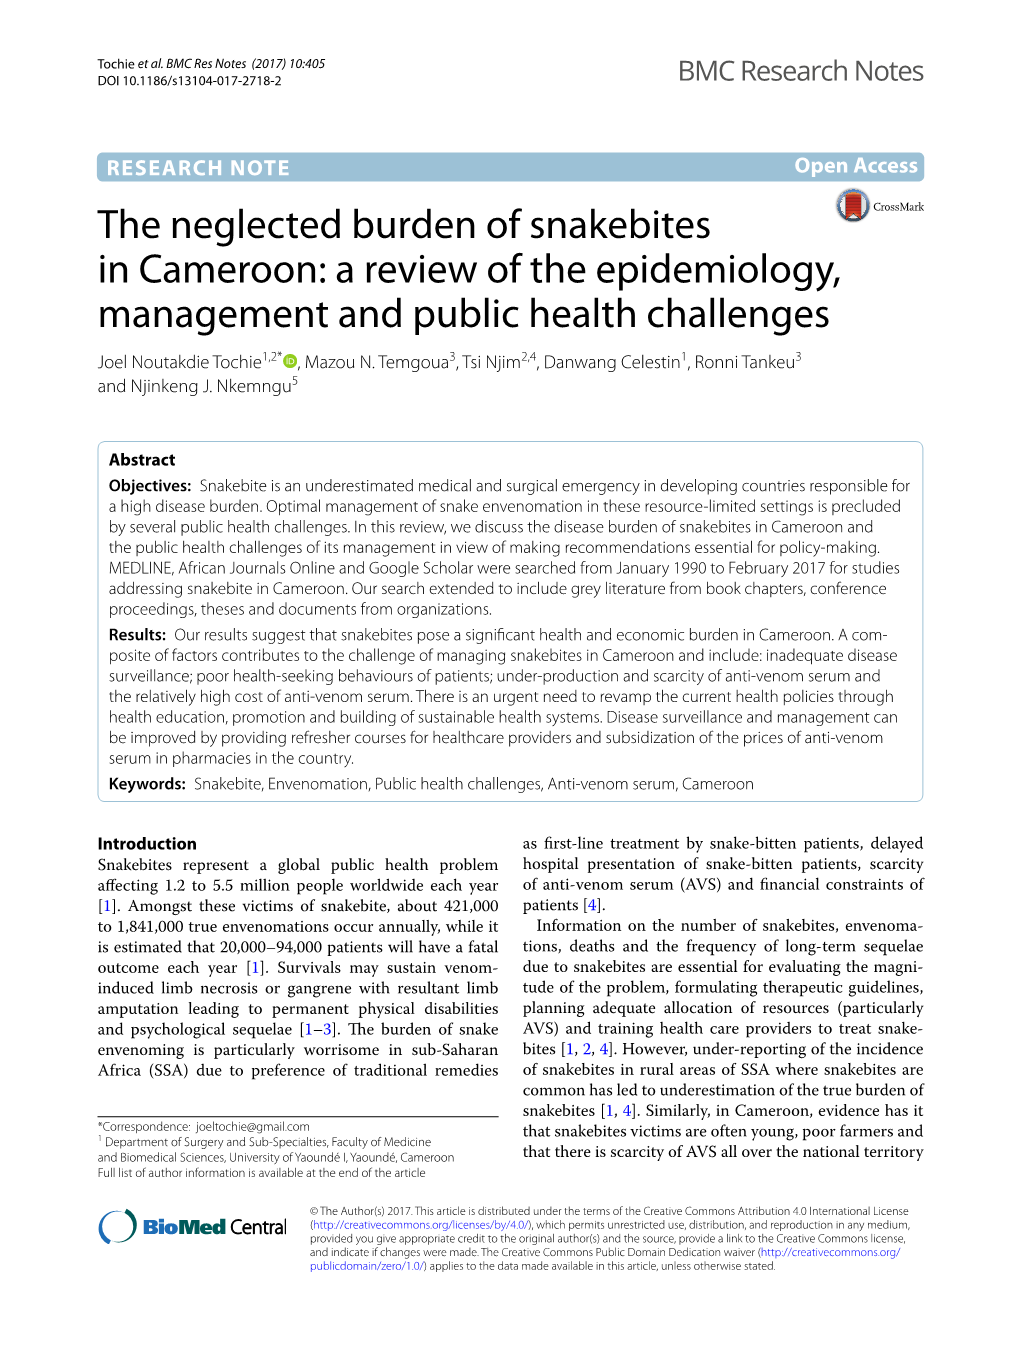 The Neglected Burden of Snakebites in Cameroon: a Review of the Epidemiology, Management and Public Health Challenges Joel Noutakdie Tochie1,2* , Mazou N